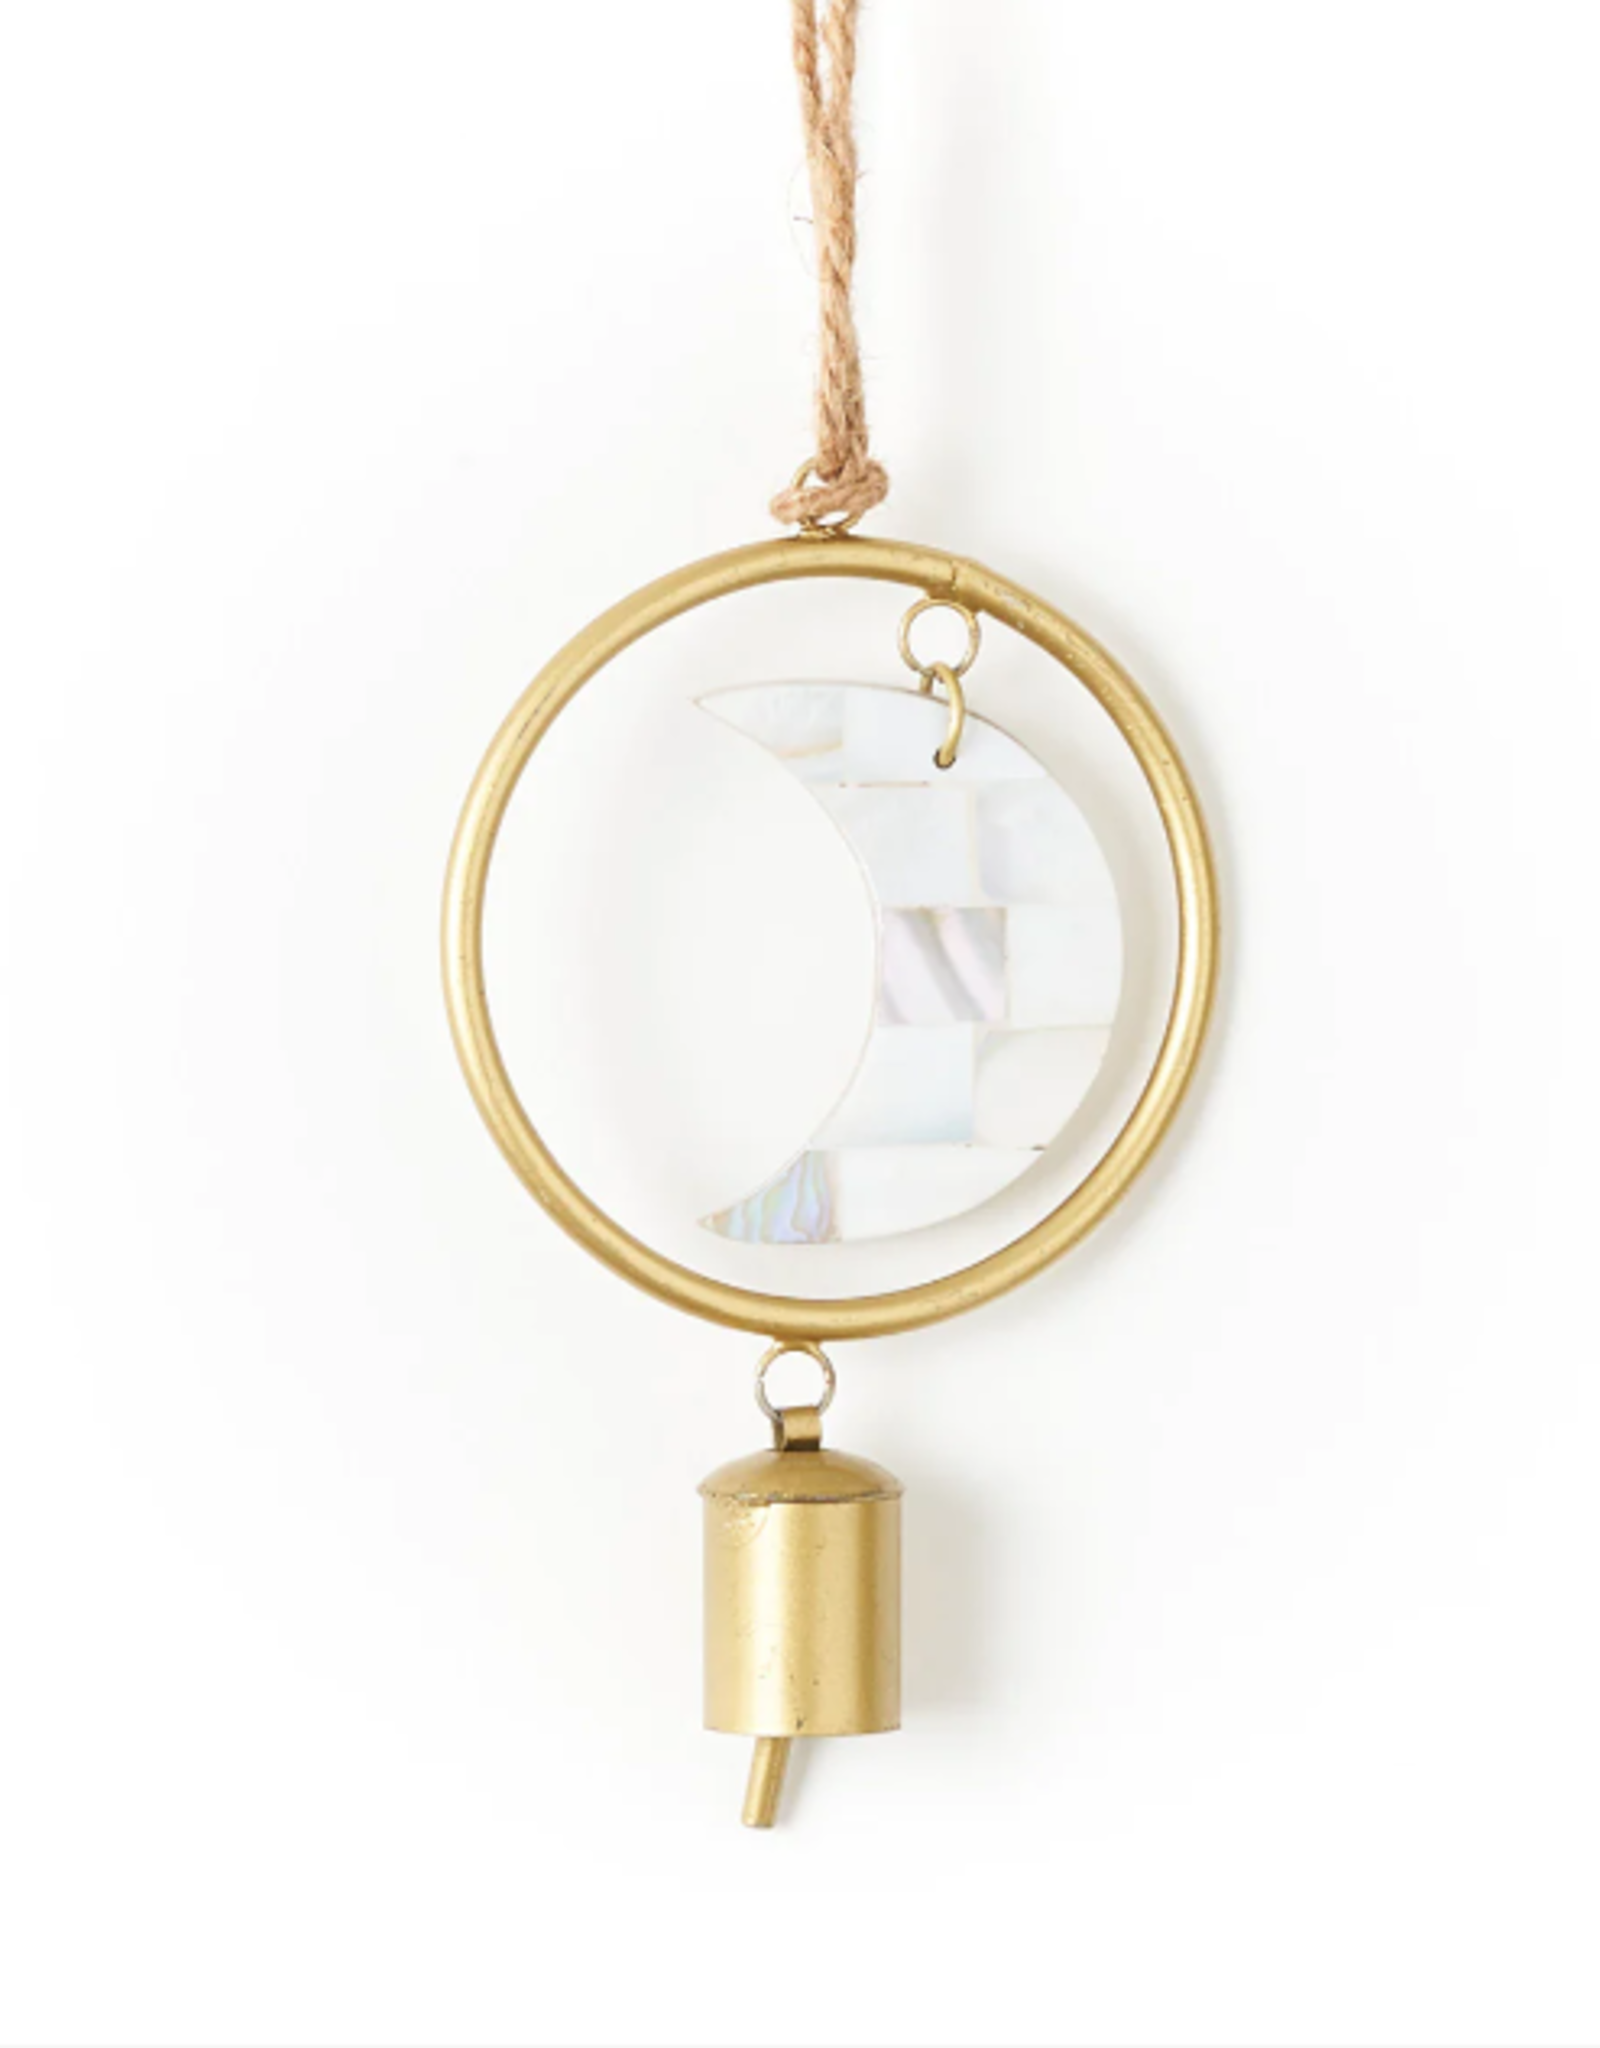 Matr Boomie Chayana Small Moon Mother of Pearl Wind Chime